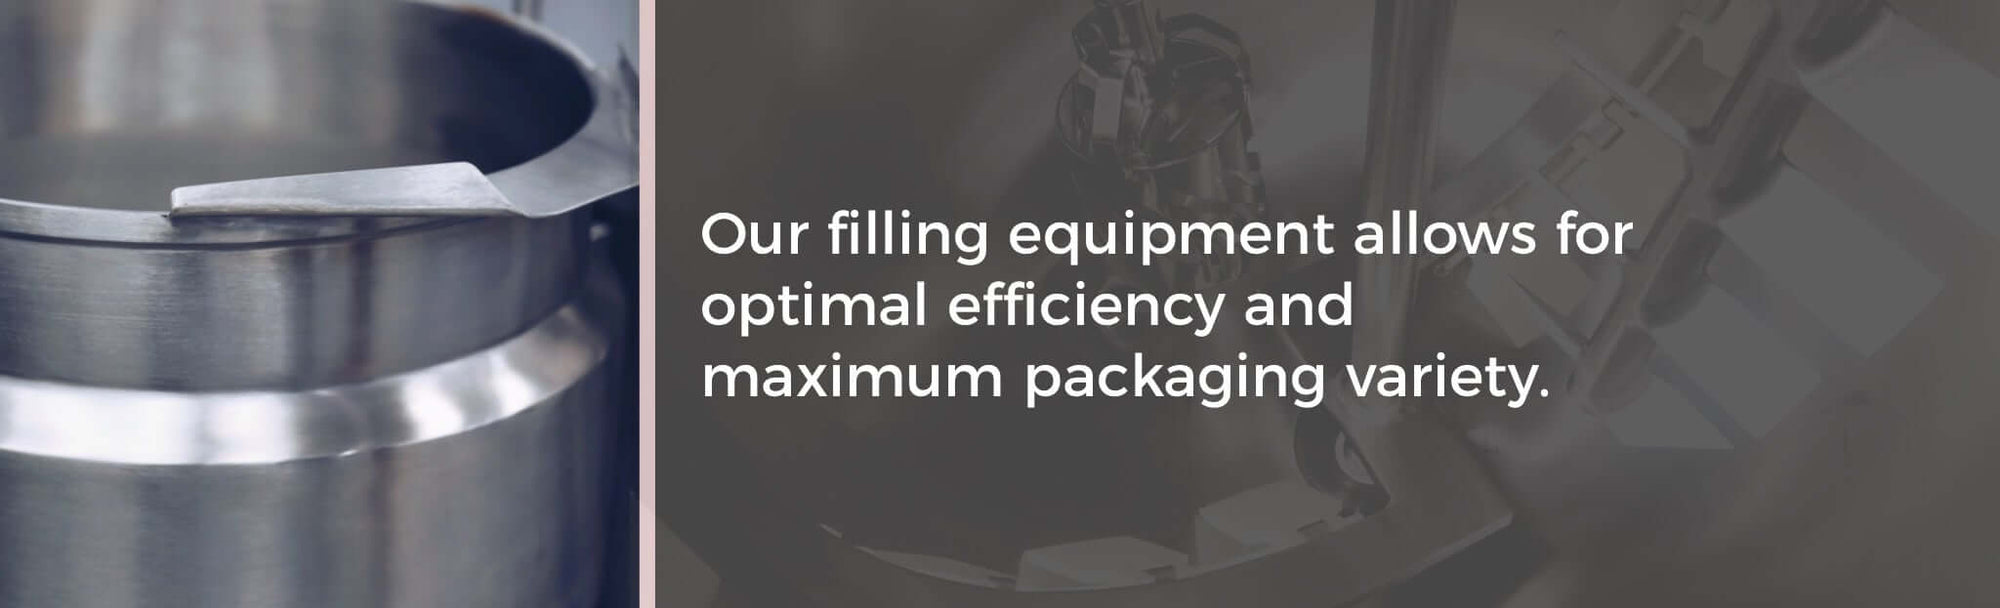 Artisan Labs filling equipment allows for optimal efficiency and maximum packaging variety. 